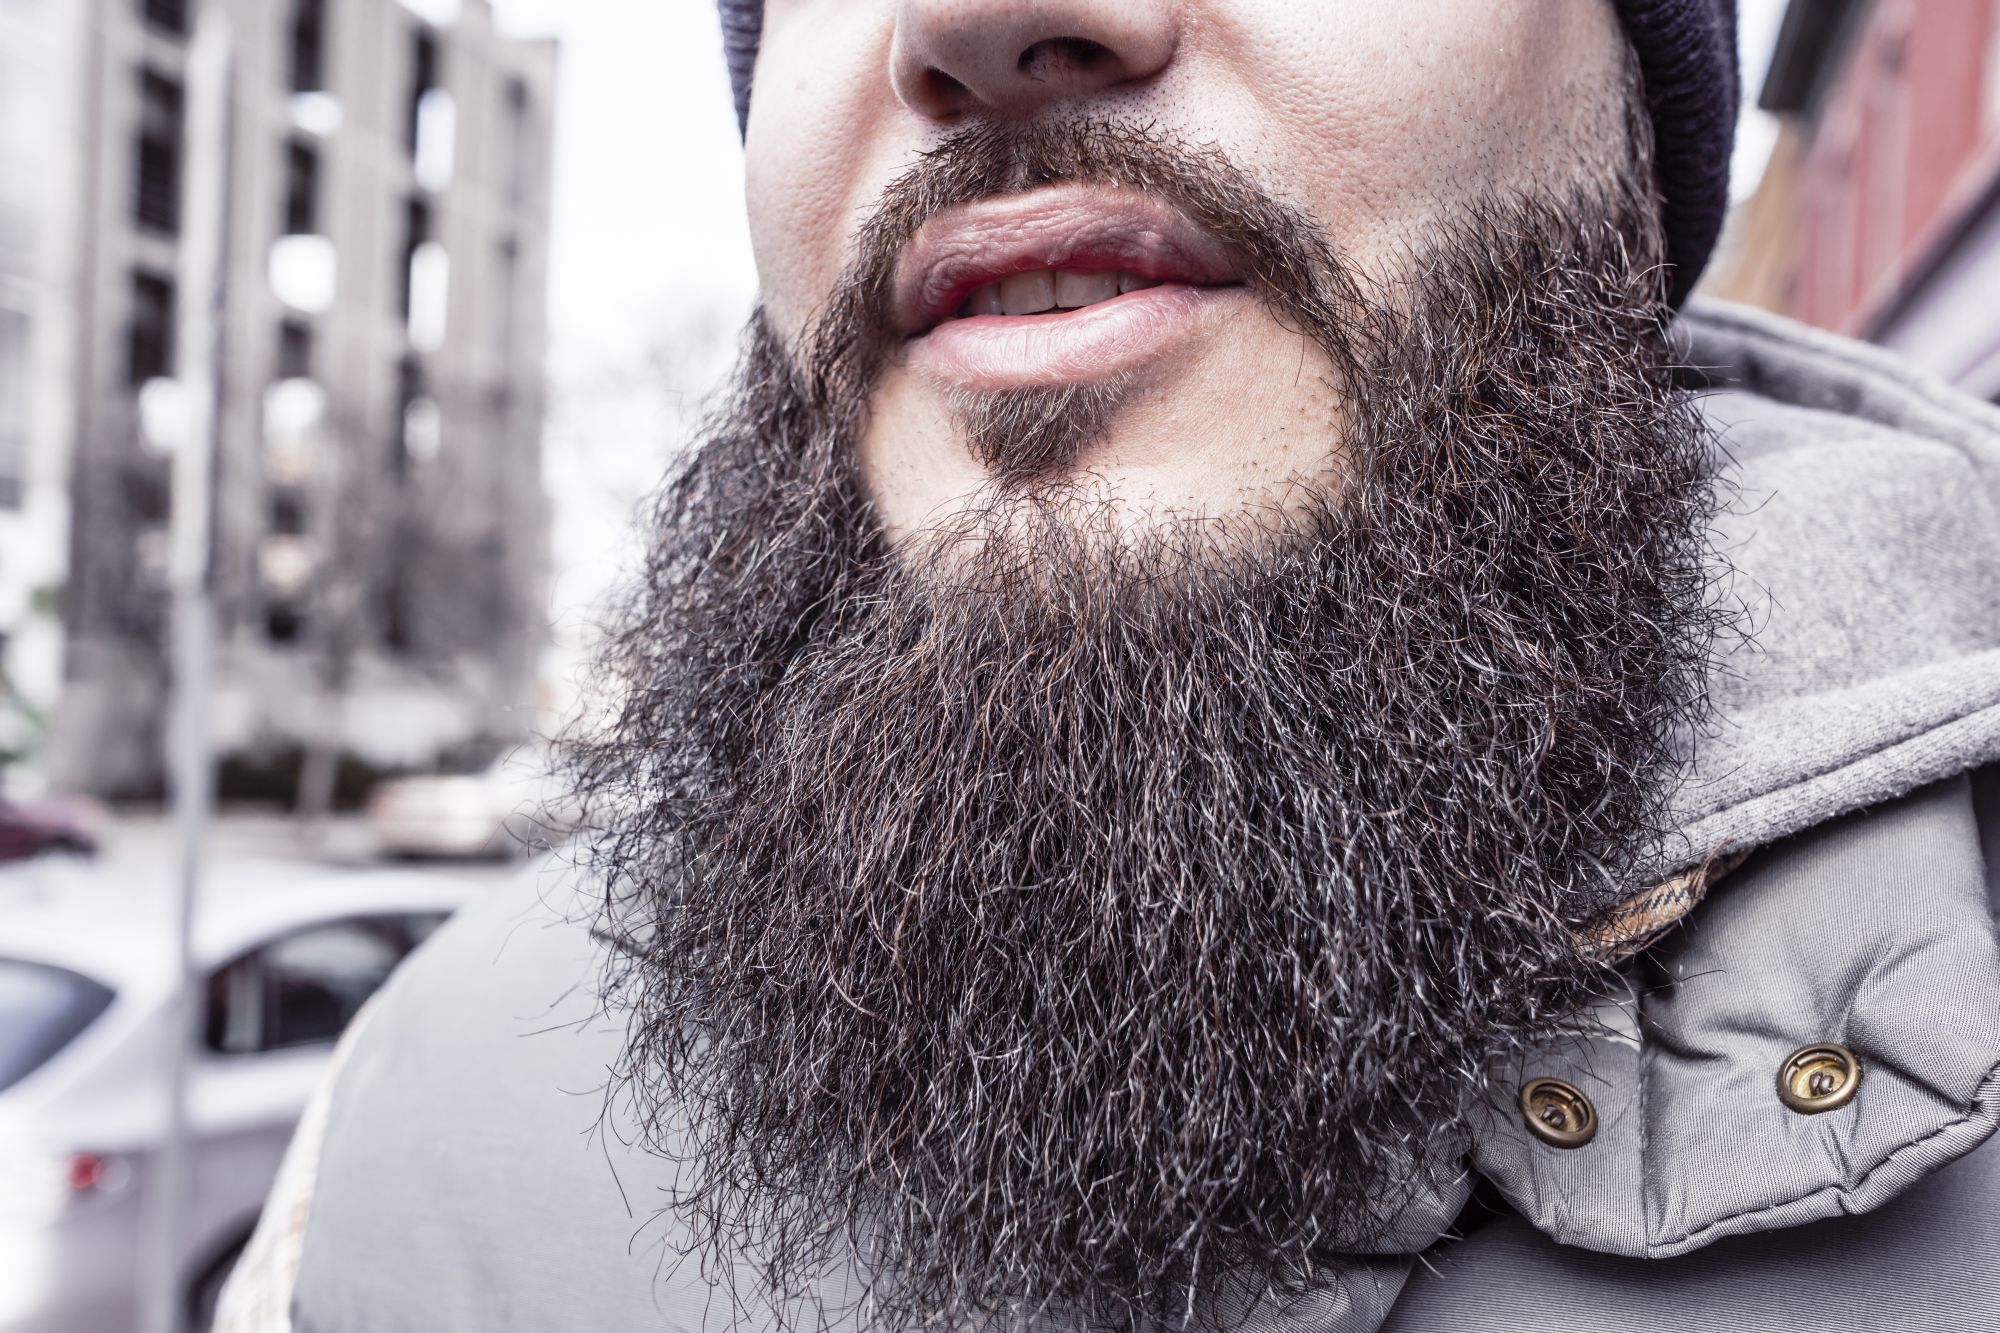 How dirty is your beard